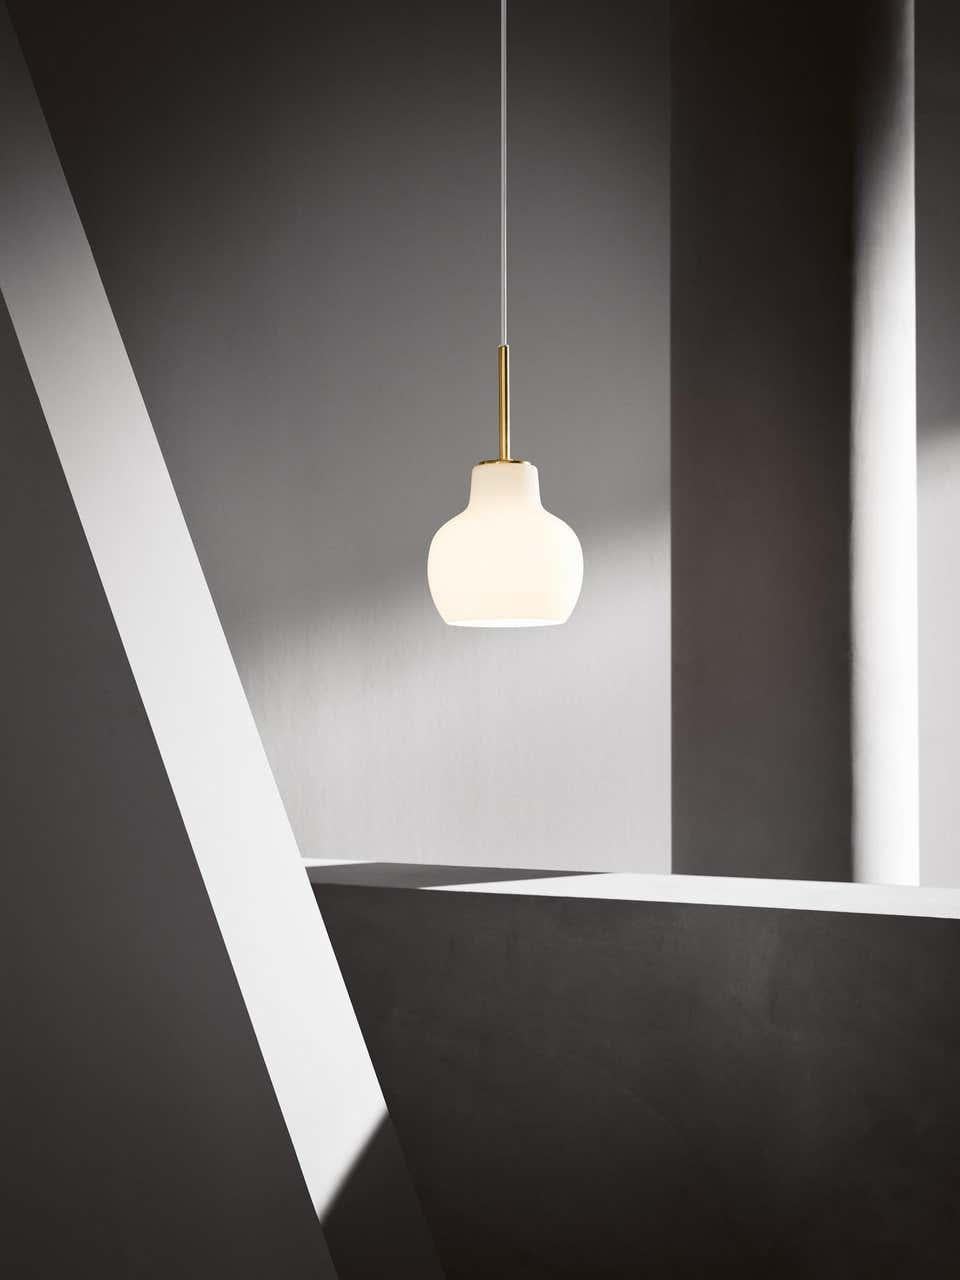 Louis Poulsen, small round glass pendant light by Vilhelm Lauritzen.
Size: Width x height x length (mm)
190 x 342 x 190, 1.2 kg
Material: Shade: Mouth-blown, 3-layered, polished opal glass. Suspension: Satin polished brass, untreated. Please note